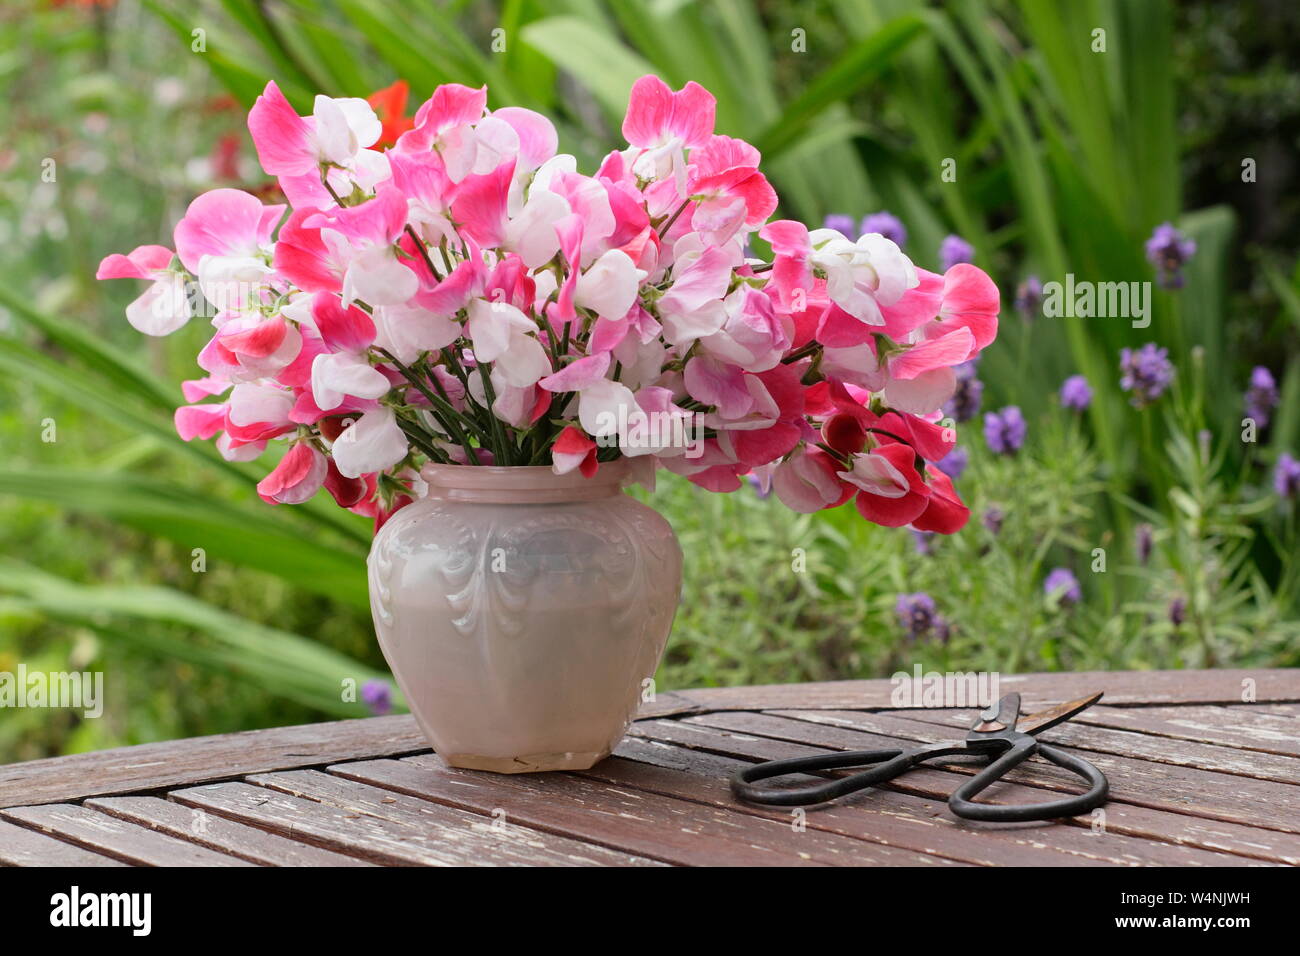 Lathyrus odoratus 'Painted Lady'. Bunch of freshly cut home grown sweet peas in a vase on outdoor wooden table in UK summer garden Stock Photo